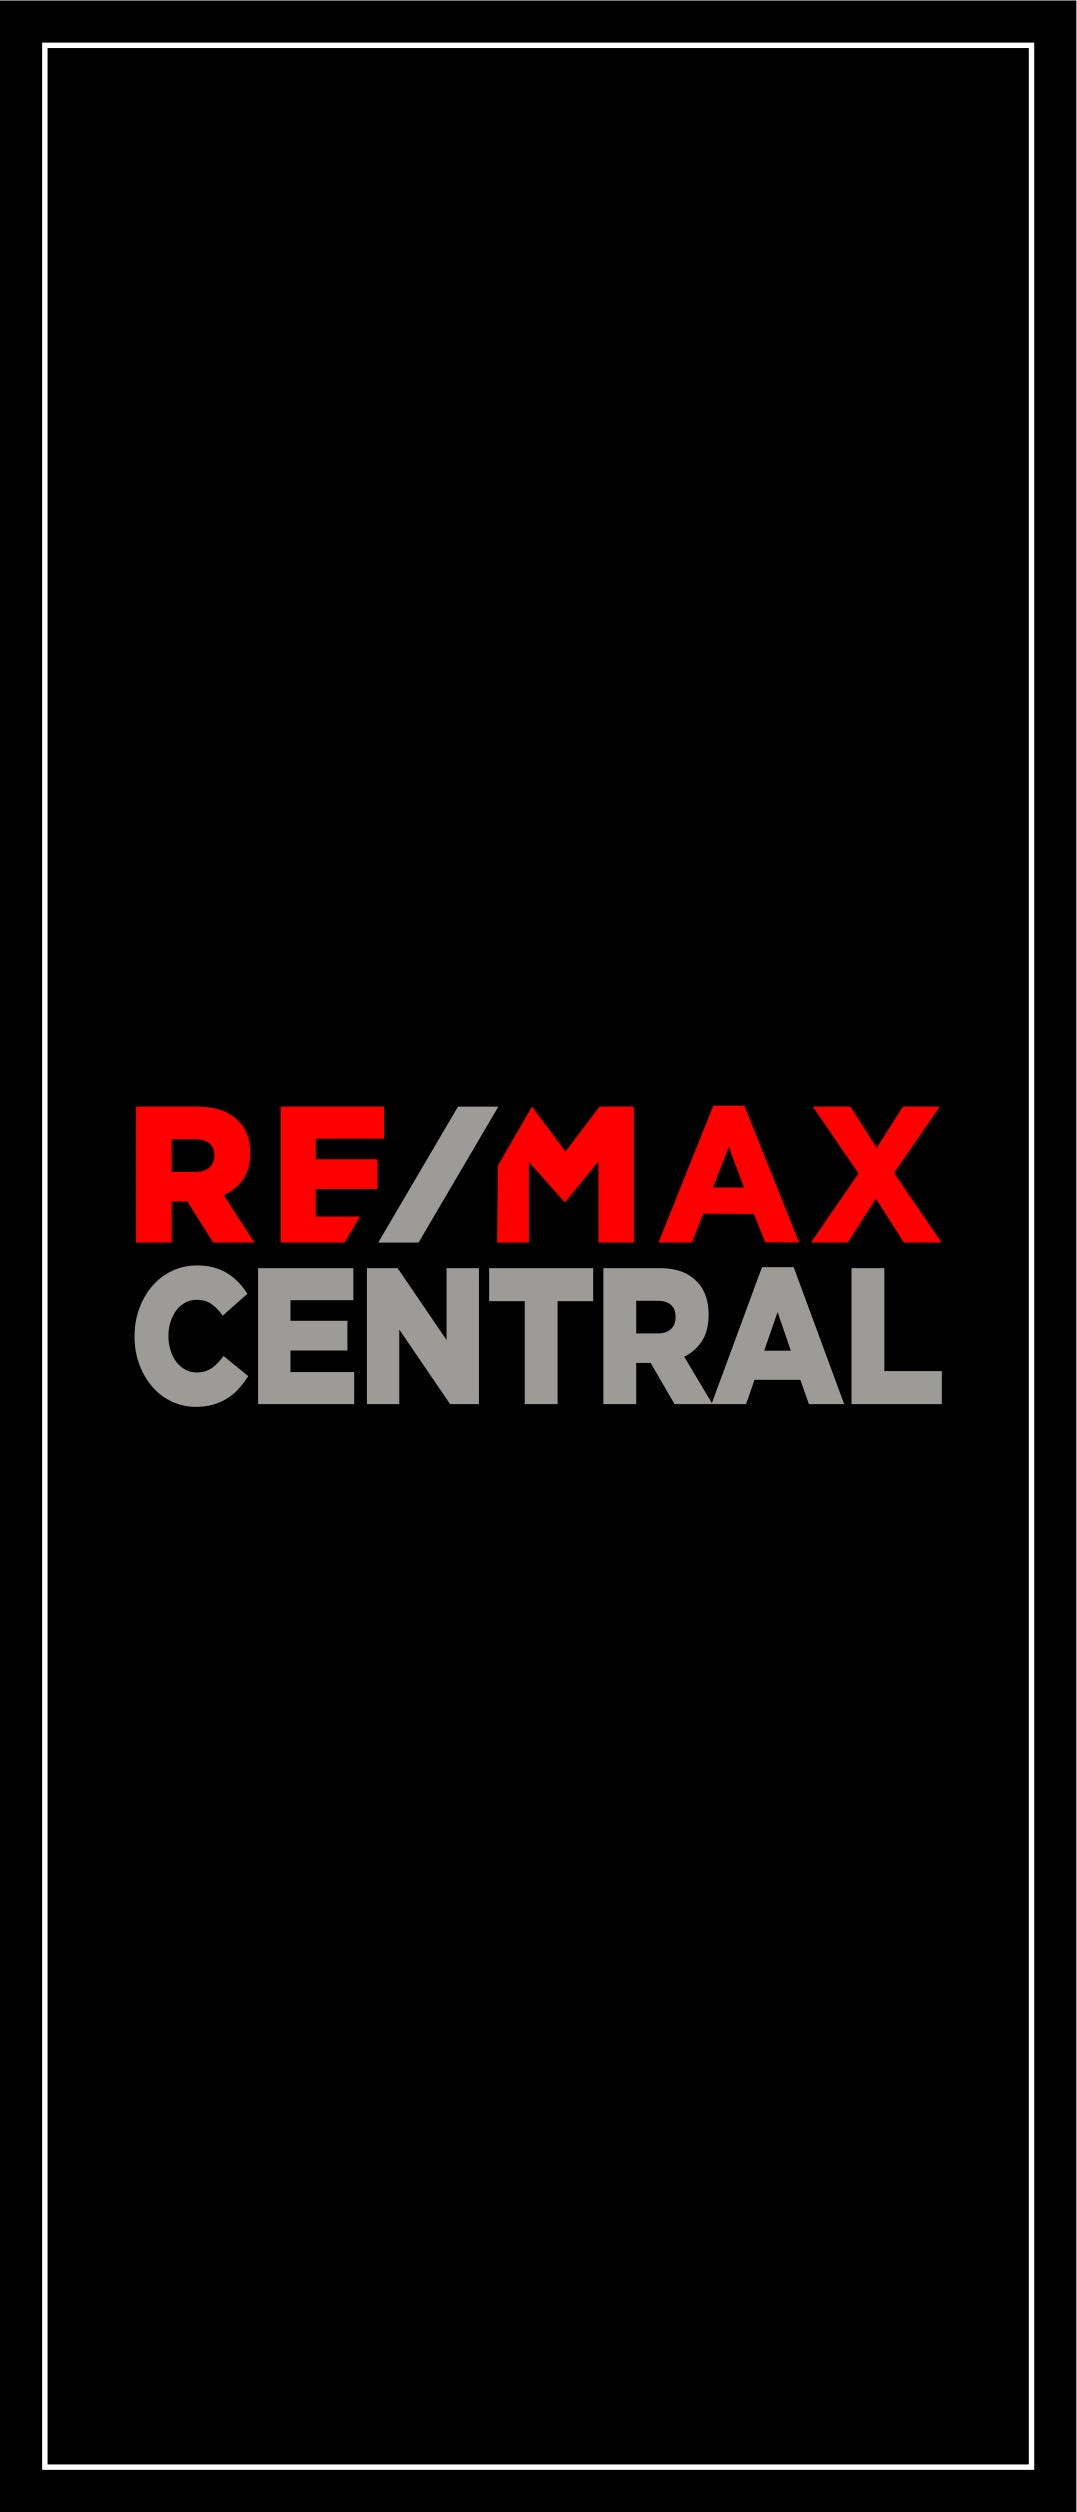 REMAX CENTRAL Vertical §